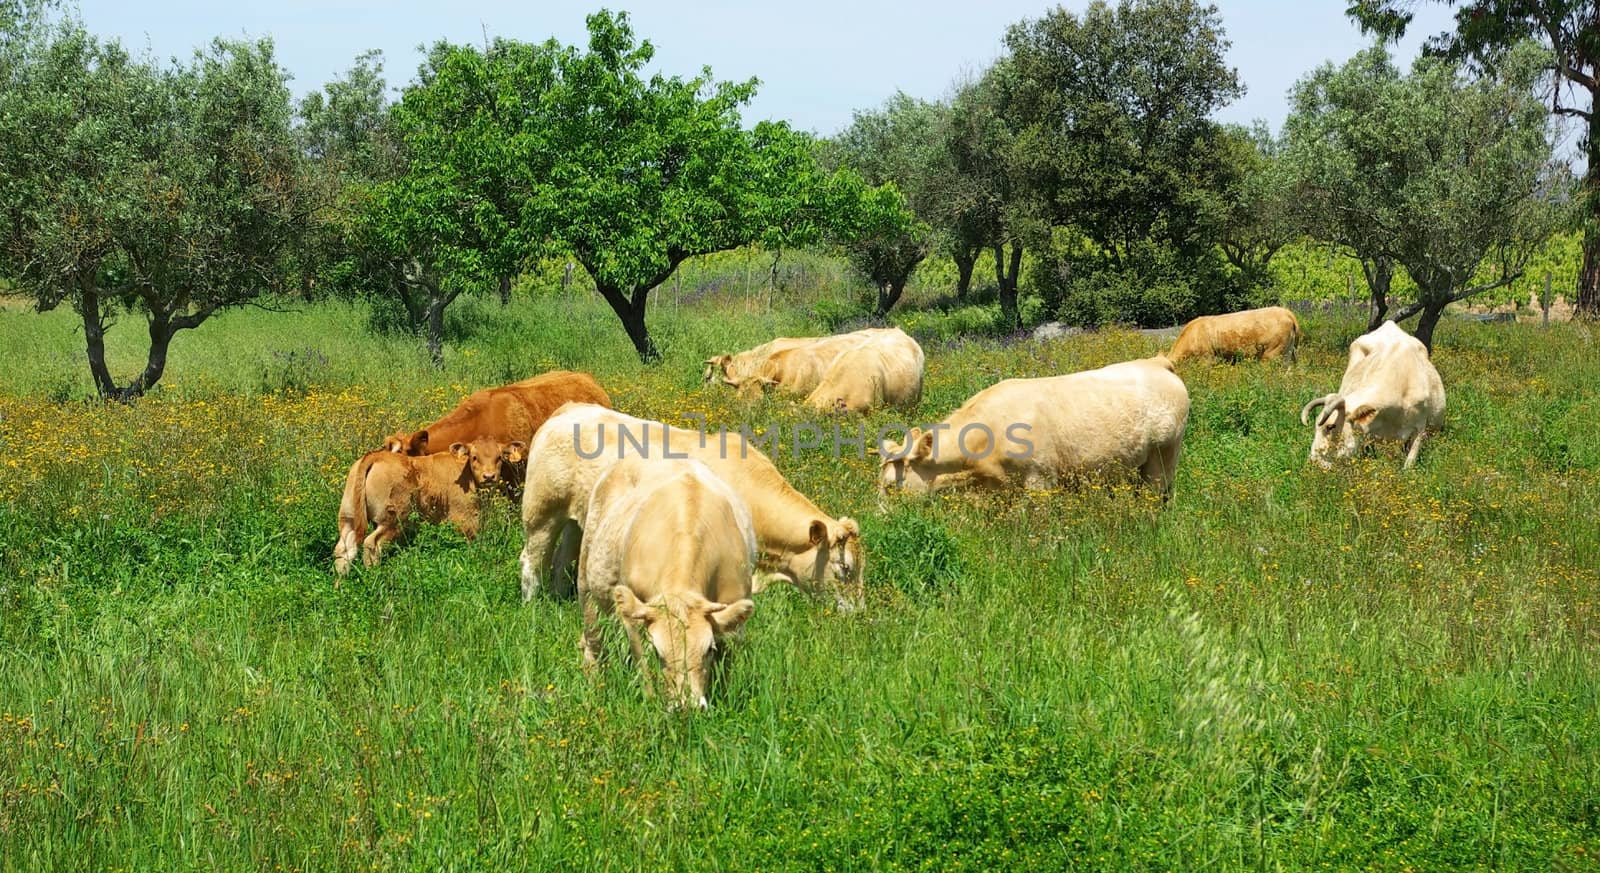 The cows graze in the green field.